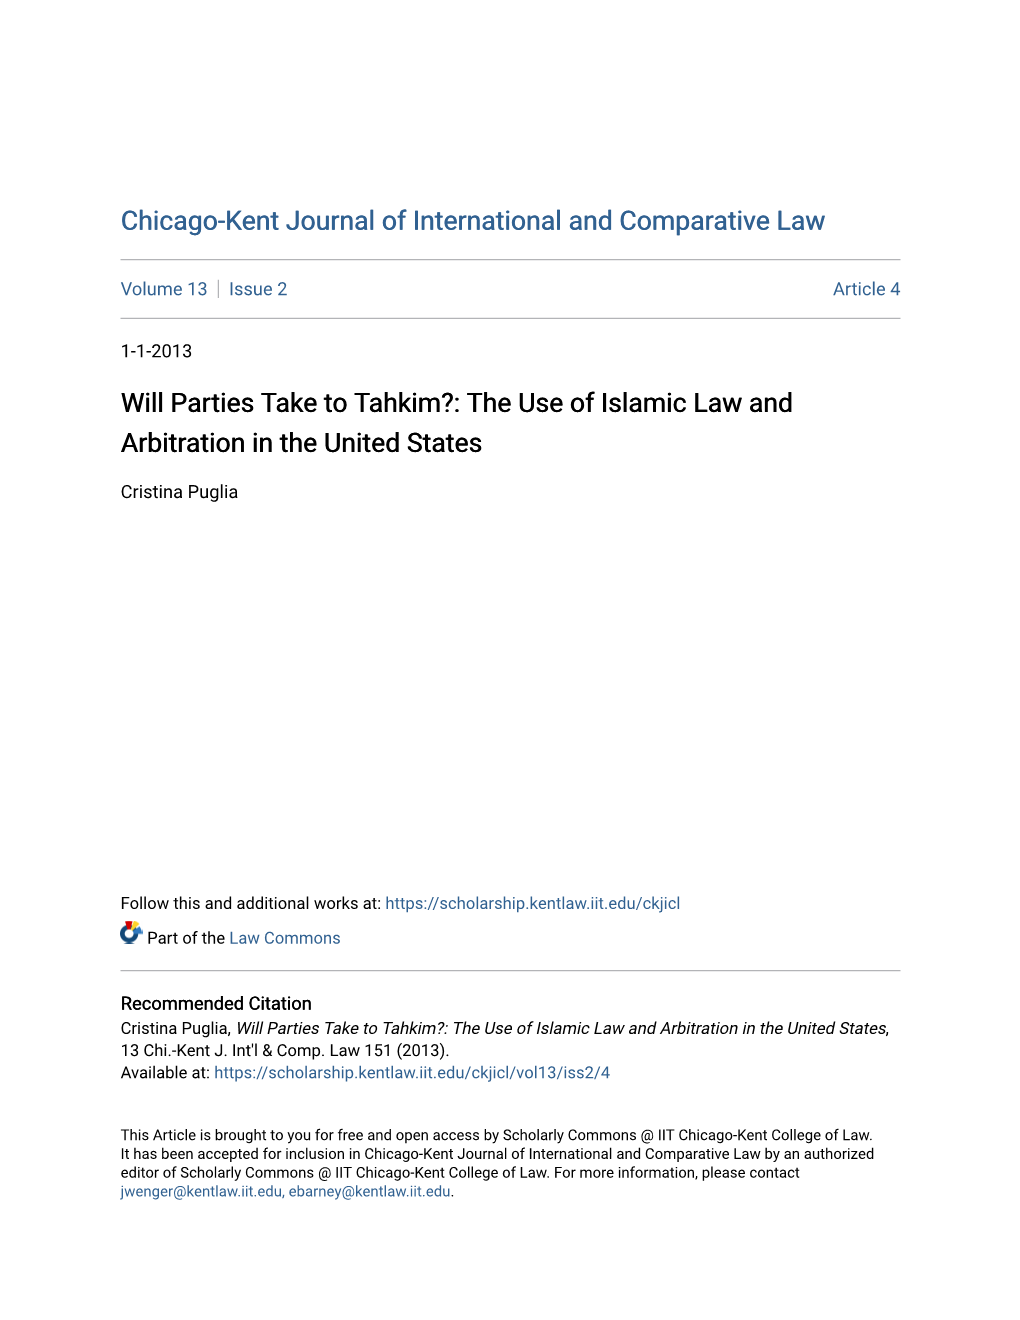 Will Parties Take to Tahkim?: the Use of Islamic Law and Arbitration in the United States